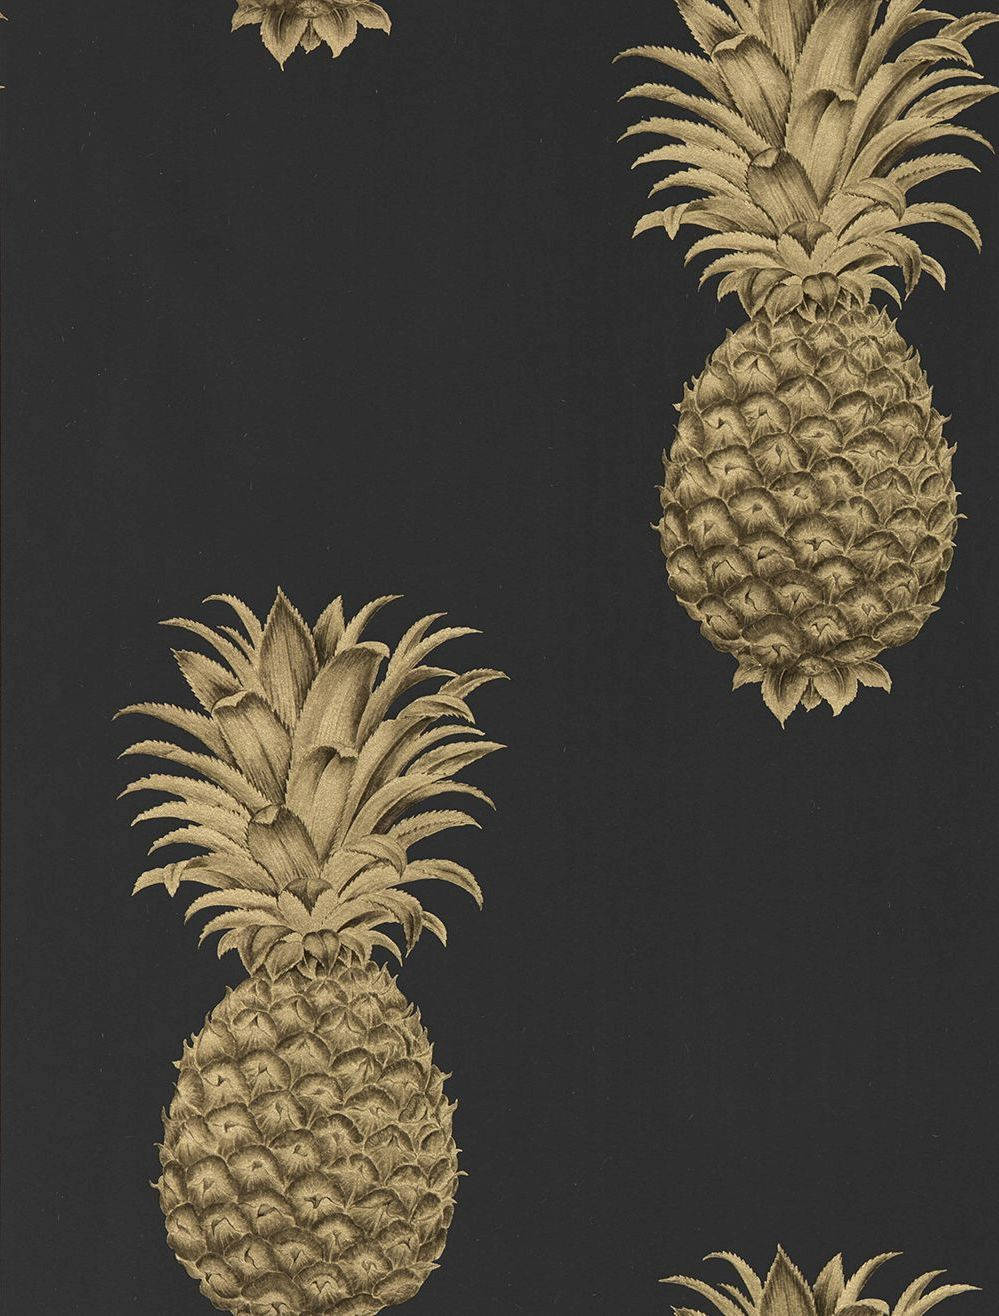 Bask In The Sweetness Of Pineapples Set Against A Backdrop Of Black Background